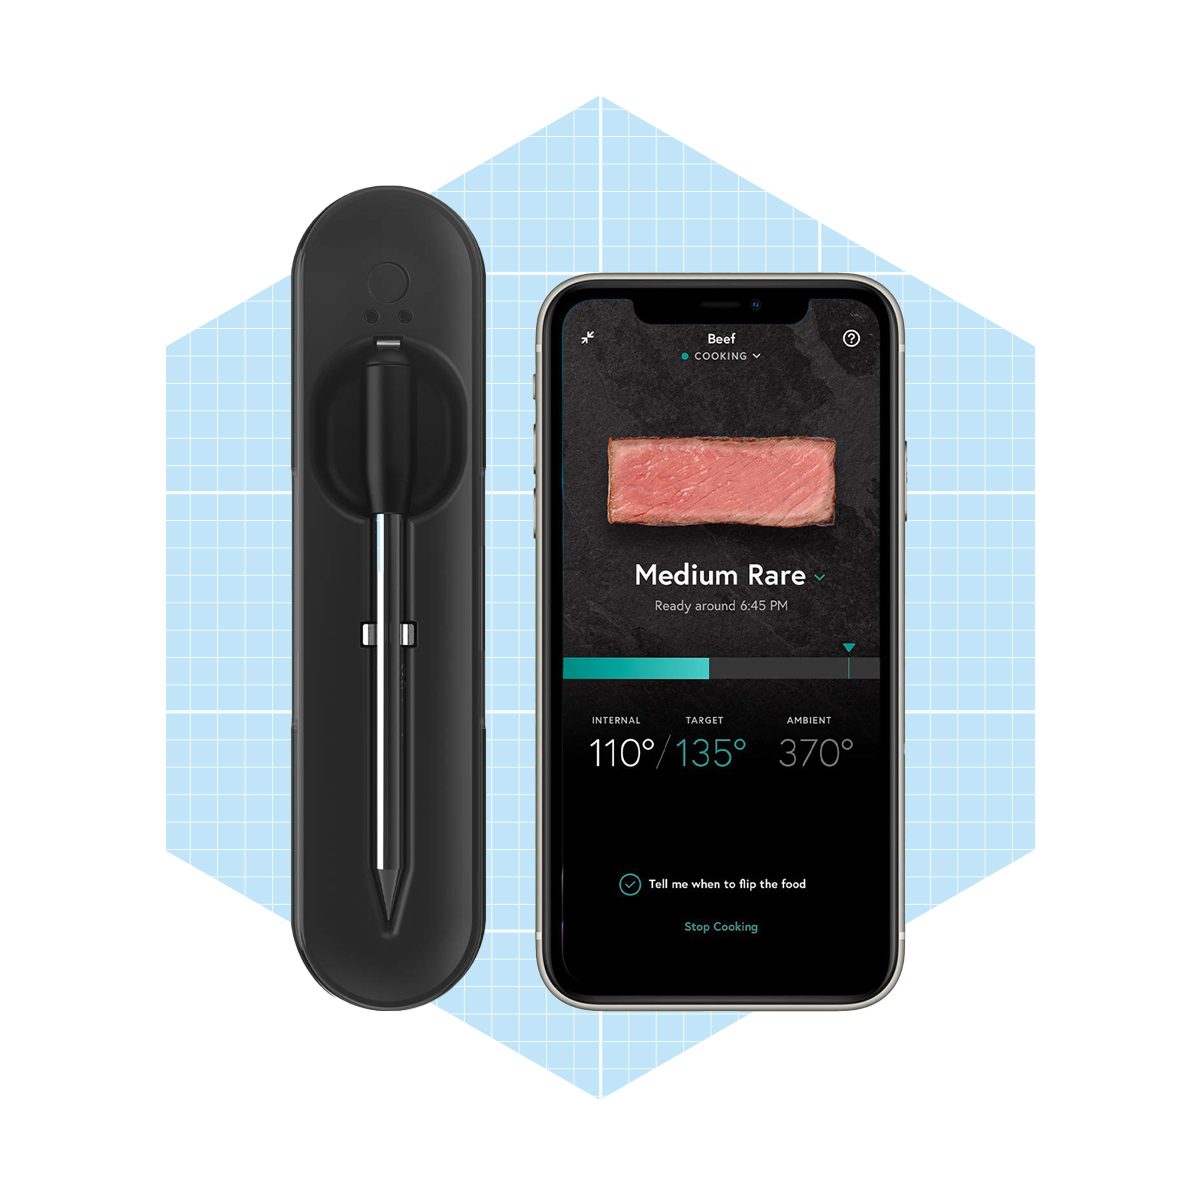 Yummly  Smart Thermometer (@yummly) • Instagram photos and videos